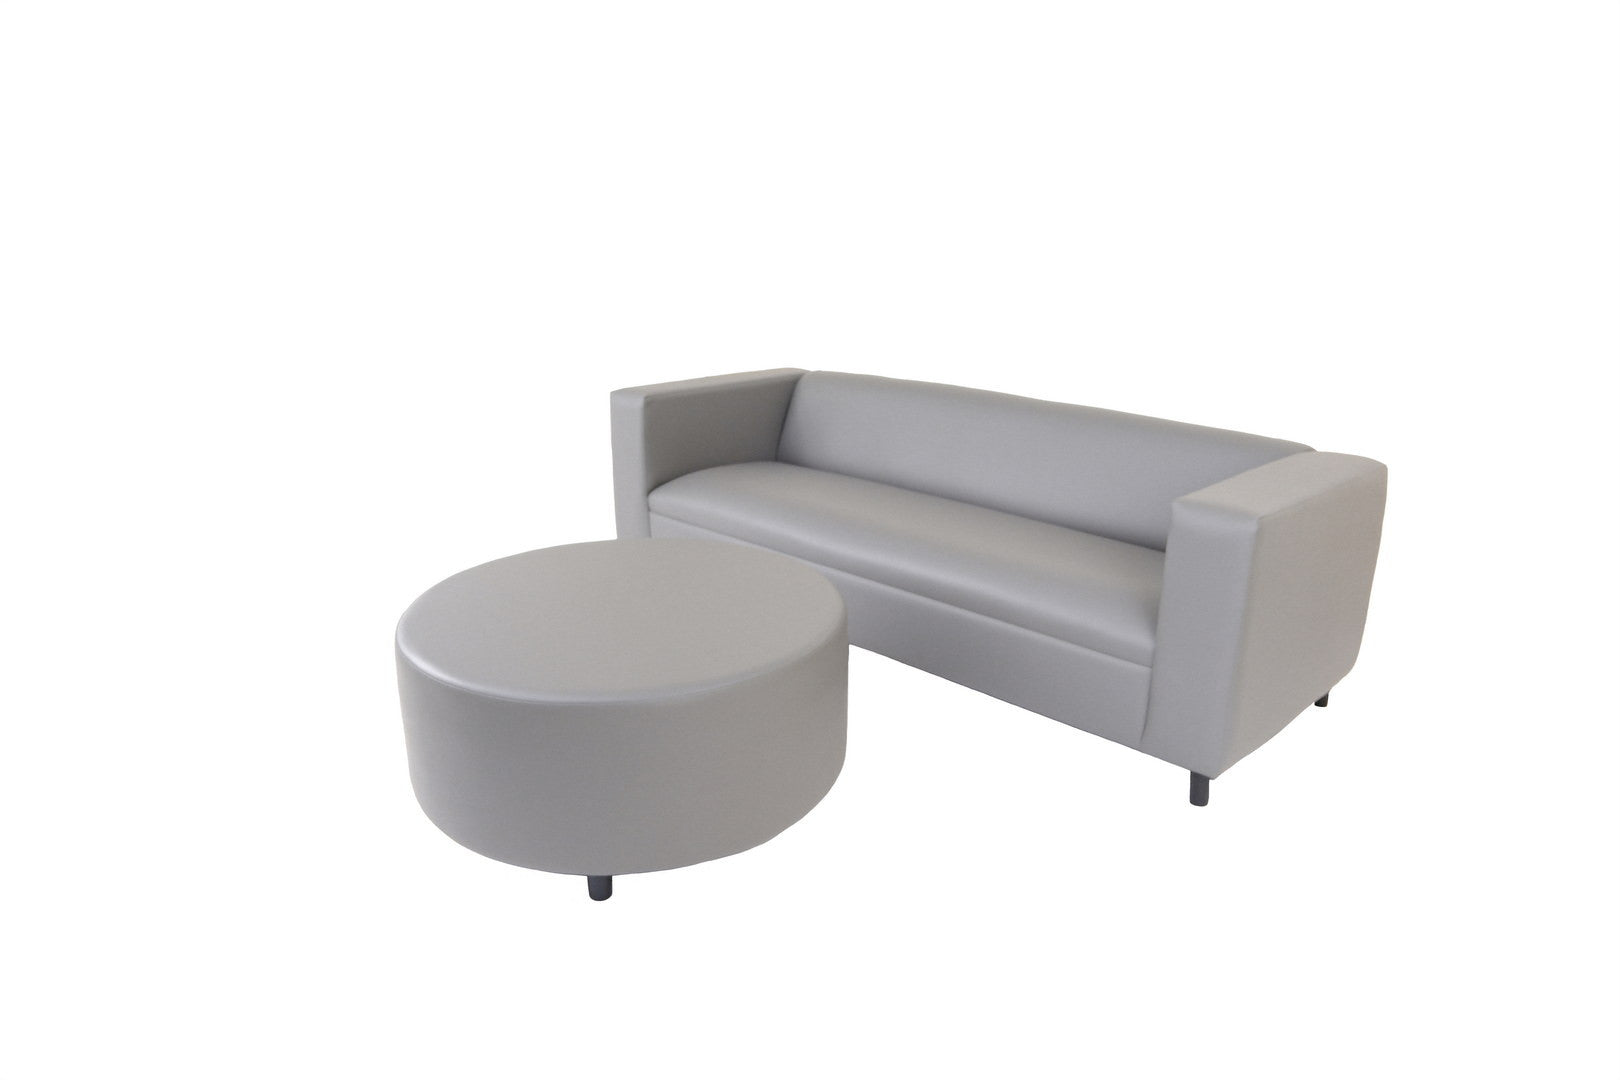 84" Gray Faux Leather And Black Sofa With Ottoman